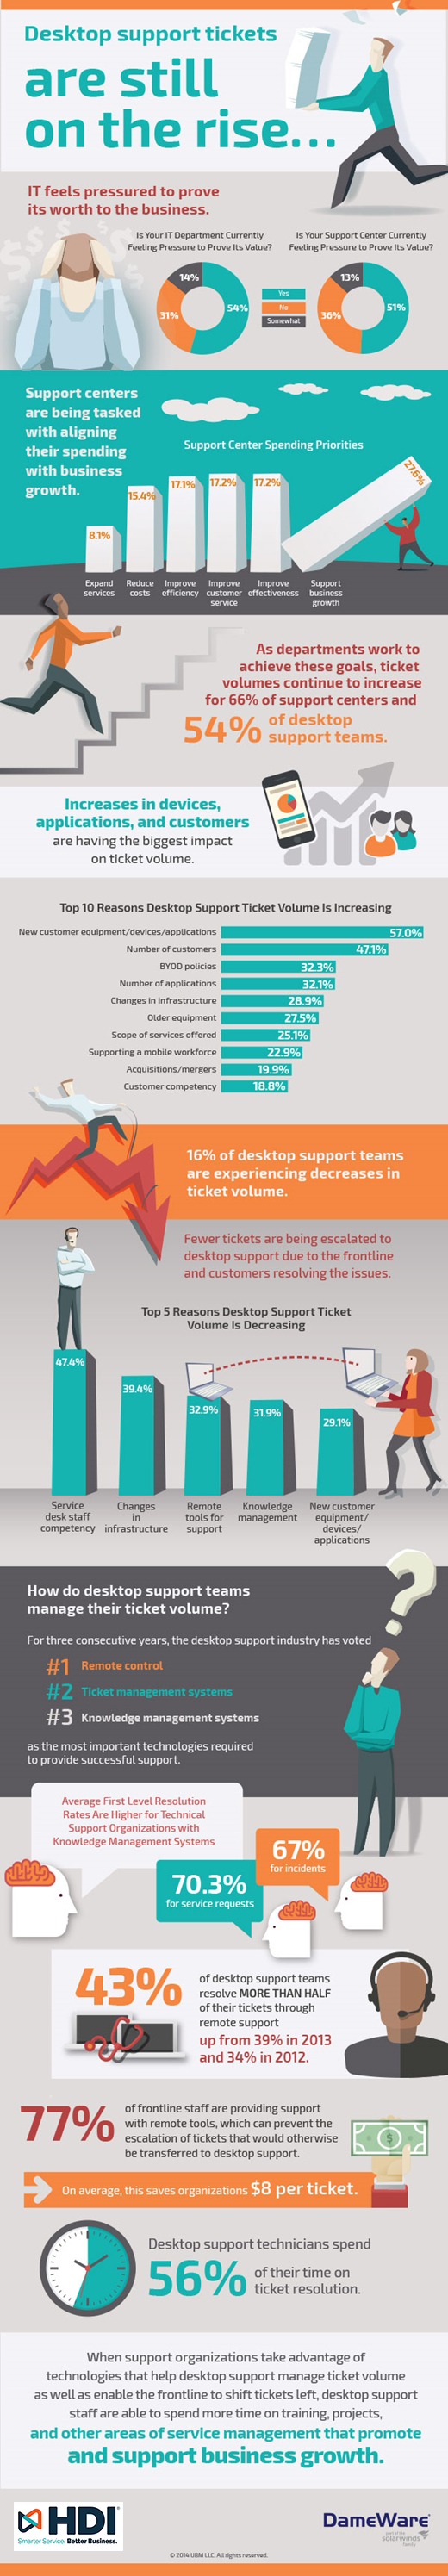 Infographic: Desktop Support Tickets Are Still on the Rise